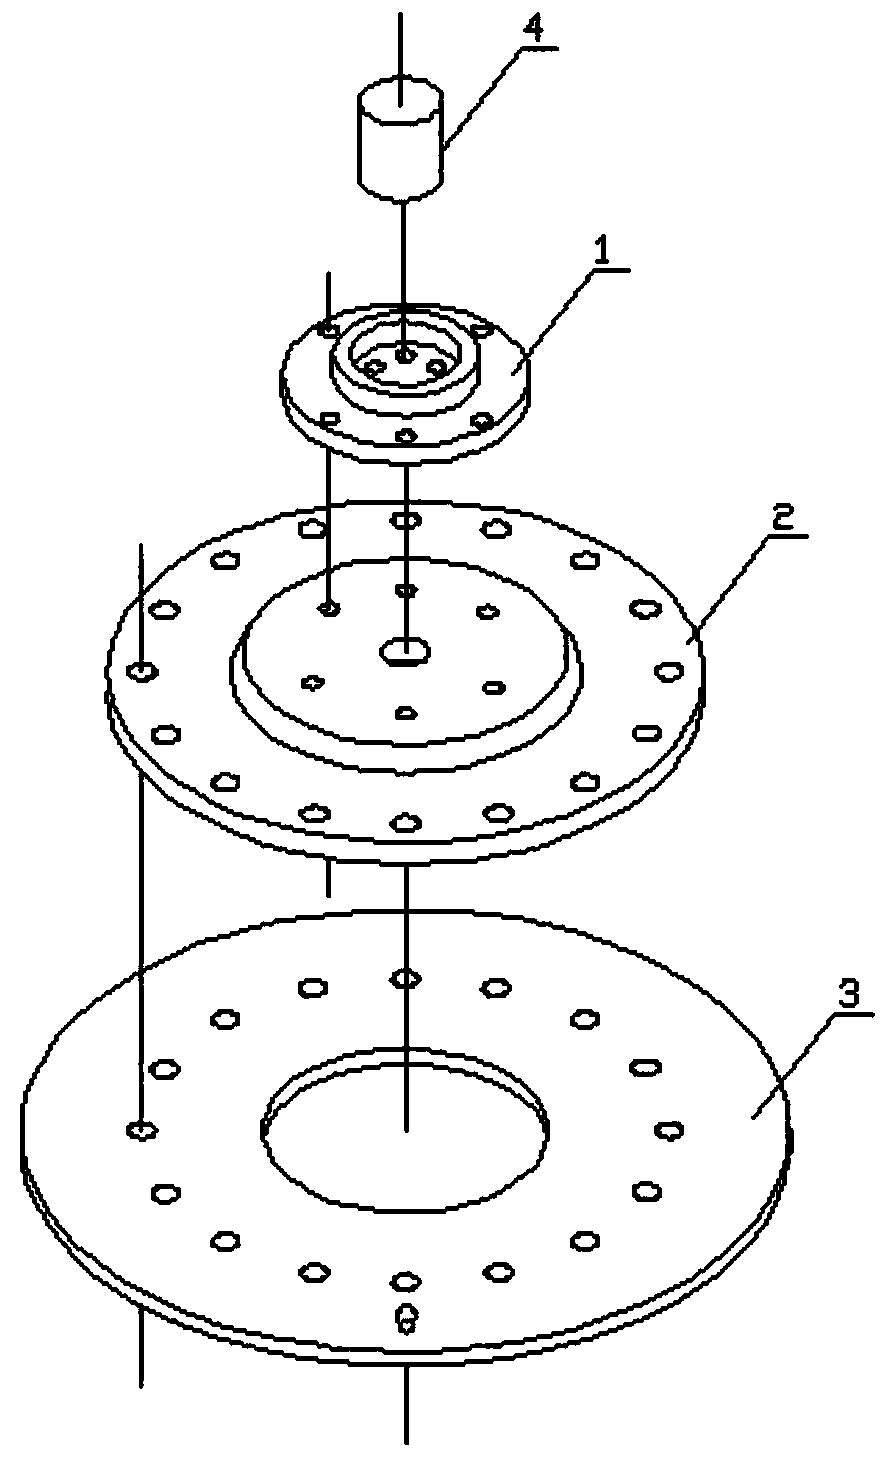 Grinding disk of ground grinding machine driven by motor